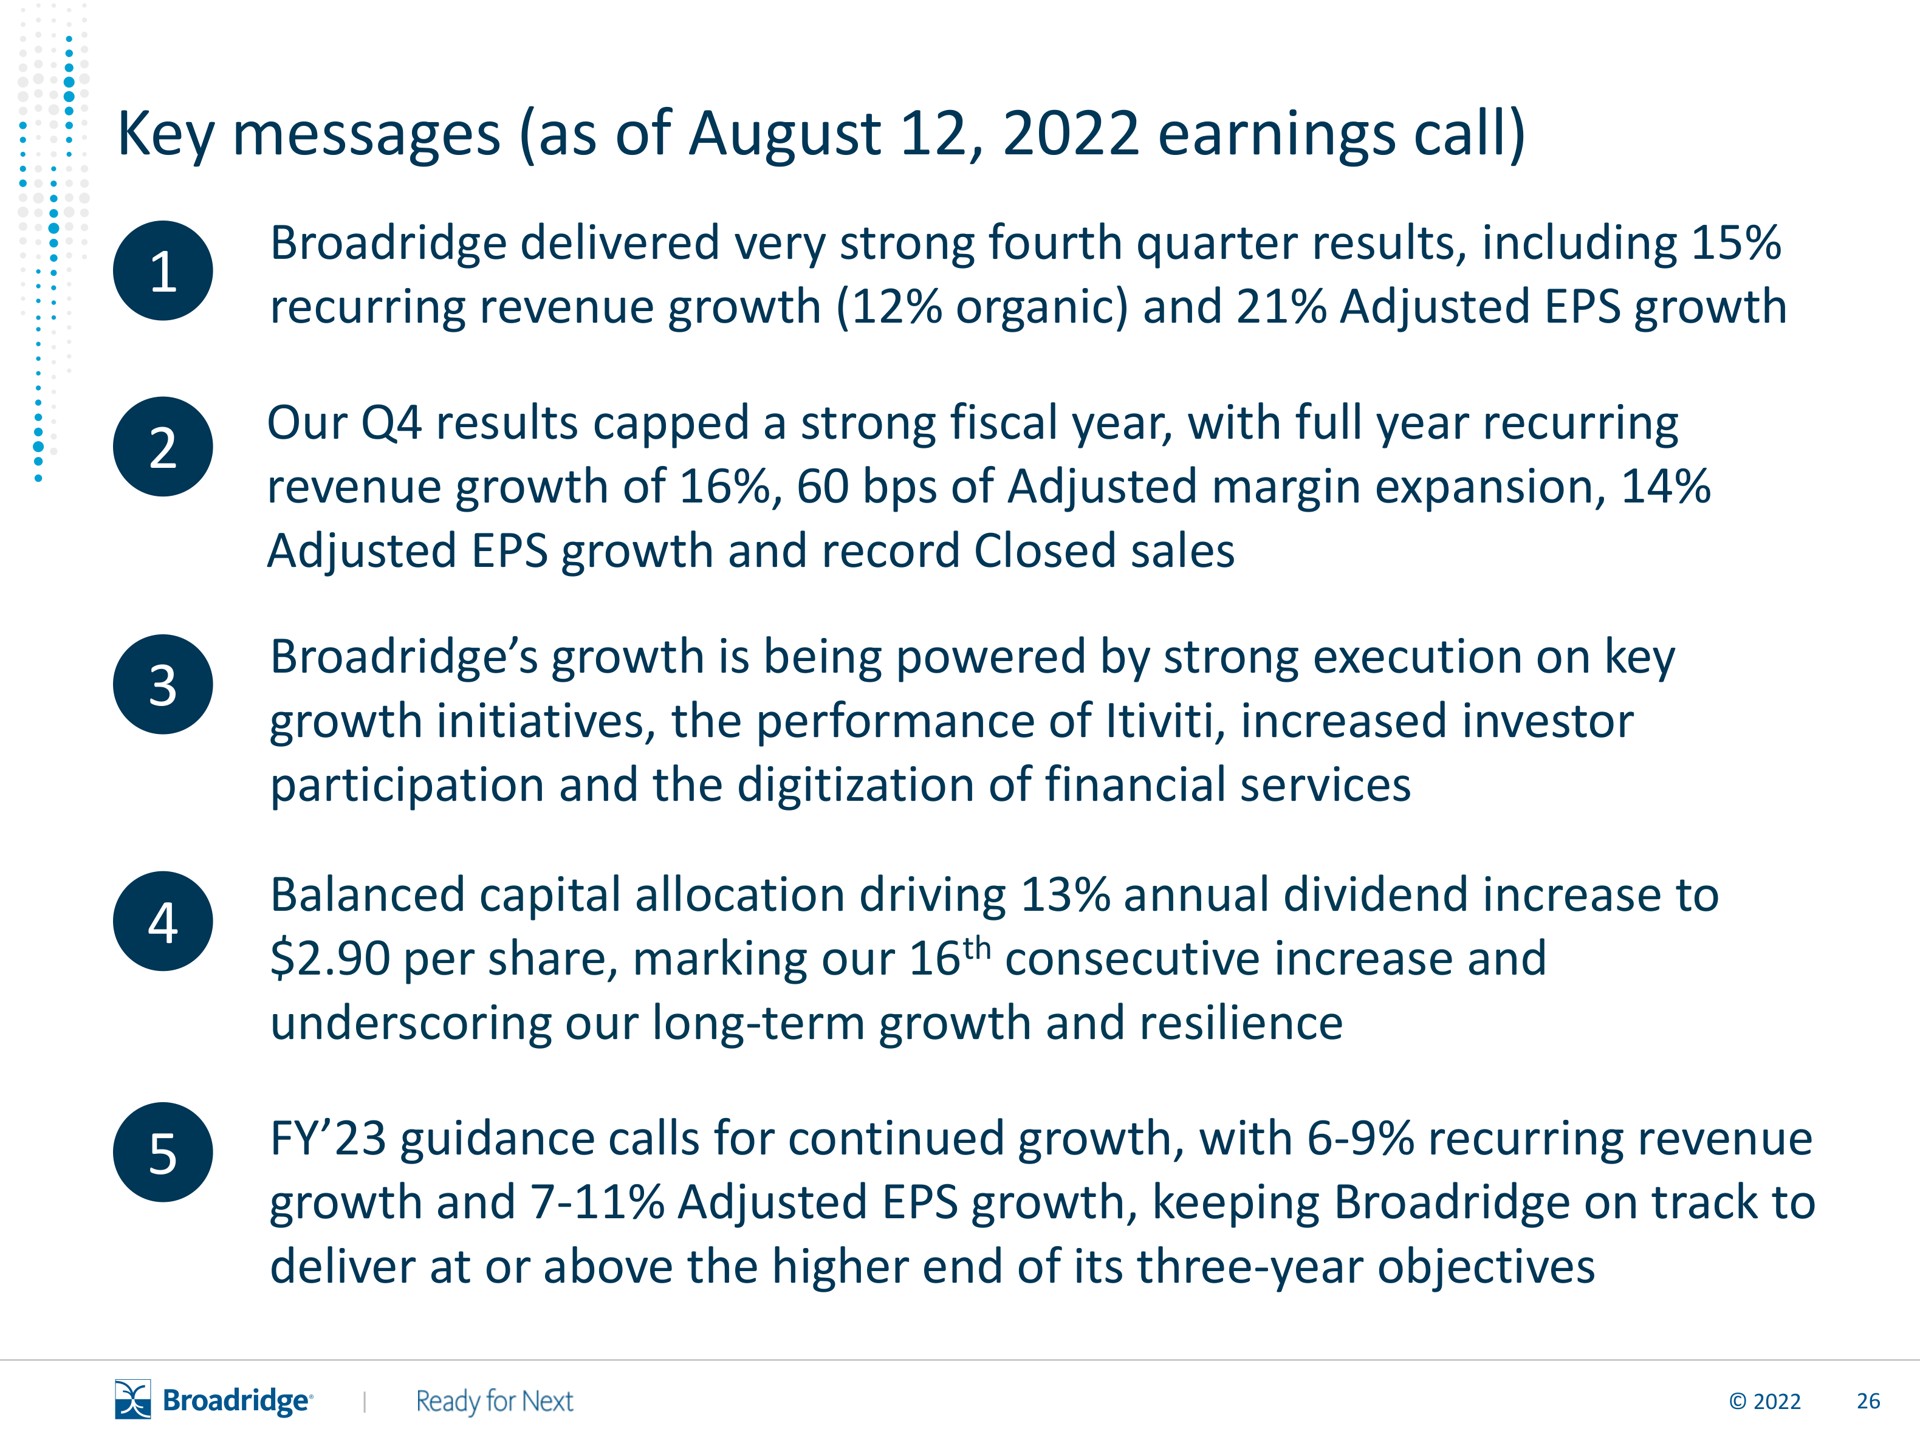 key messages as of august earnings call | Broadridge Financial Solutions